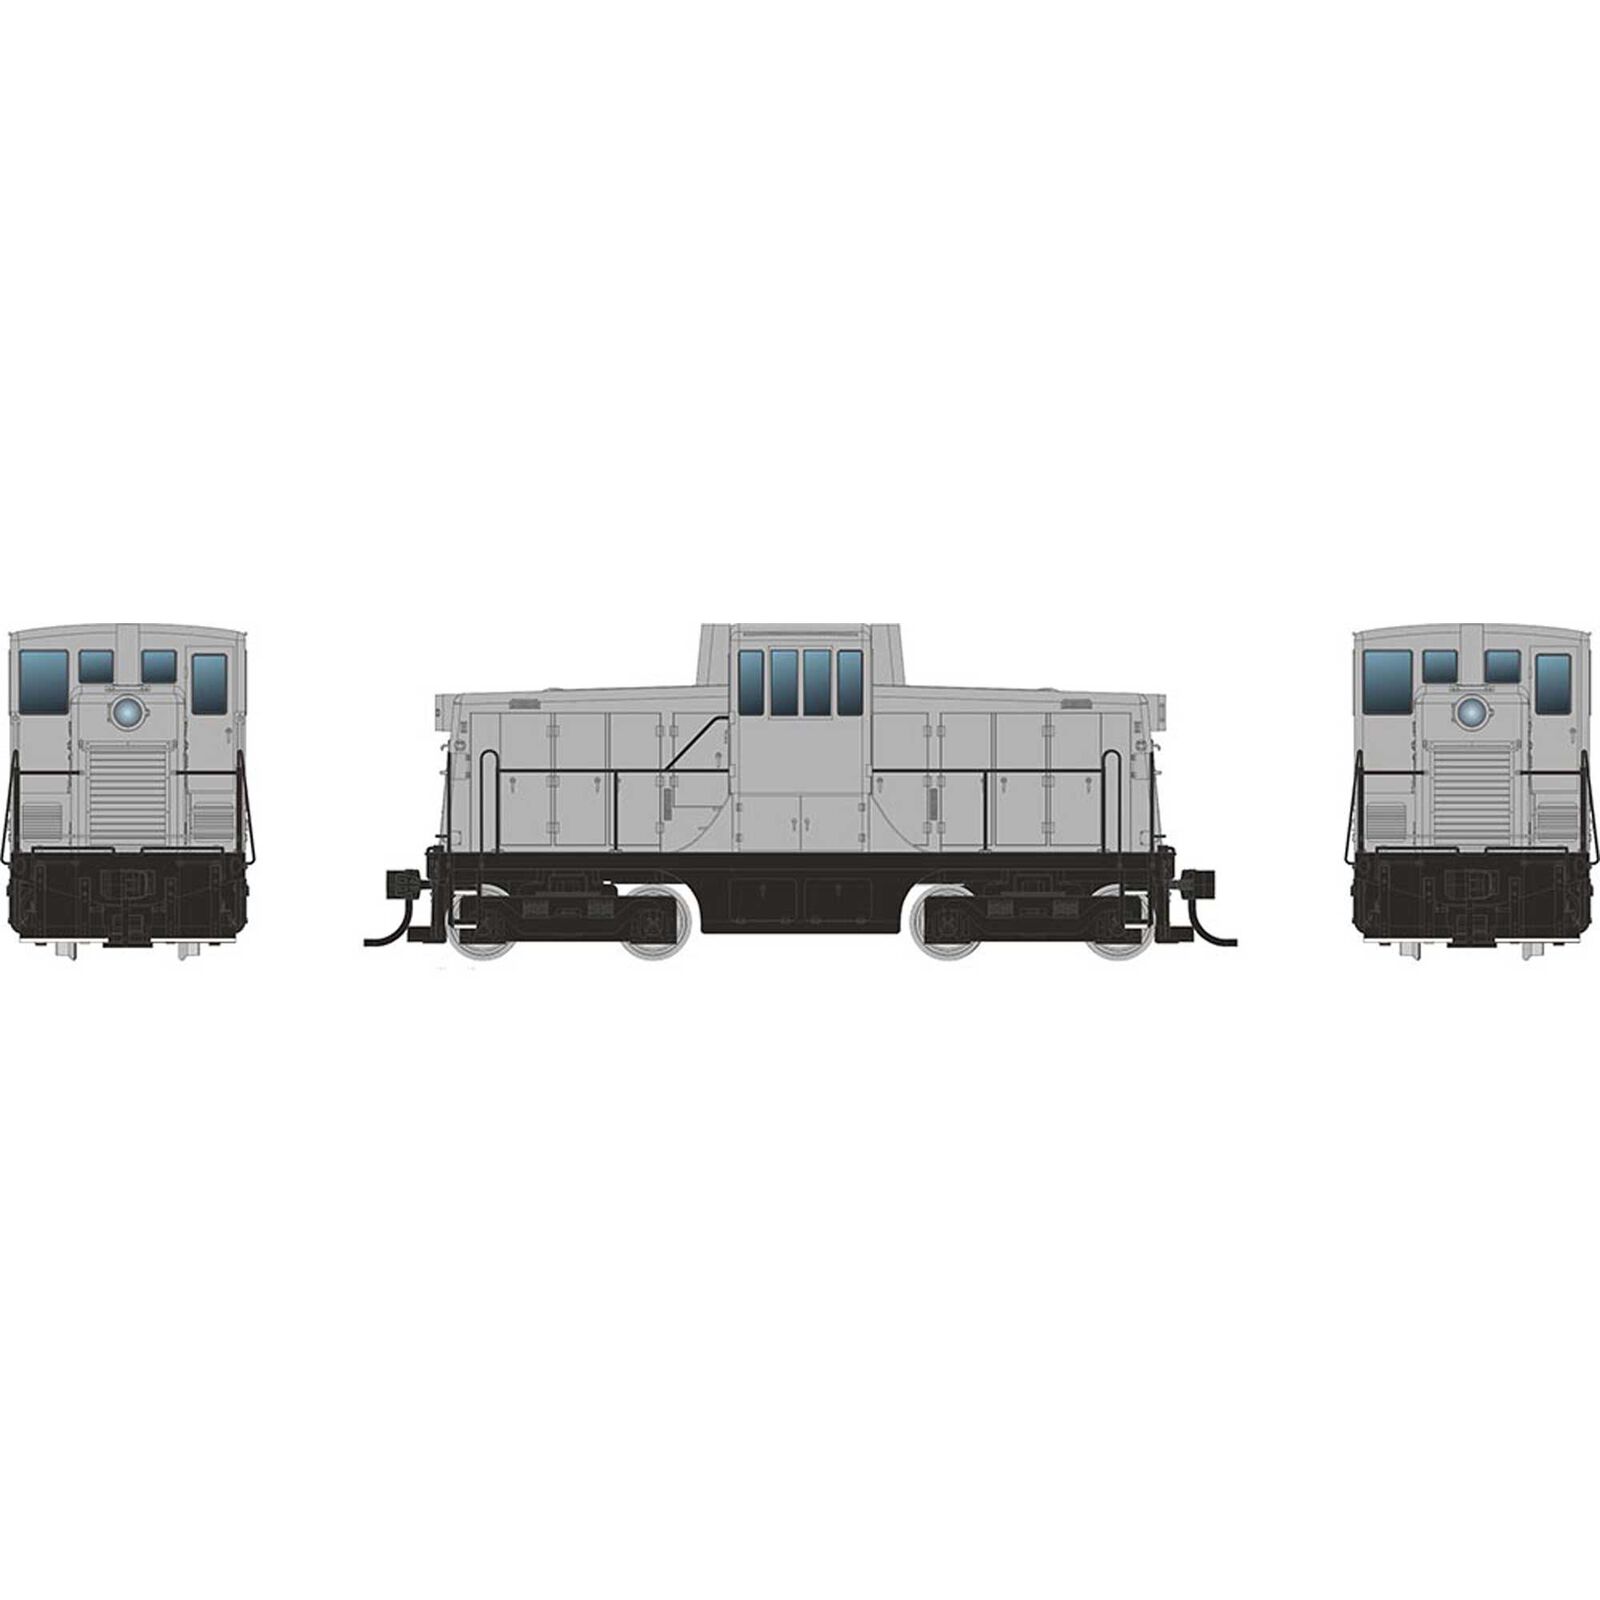 HO GE 44 Tonner Switcher Locomotive with DCC & Sound, Undecorated Phase III Body